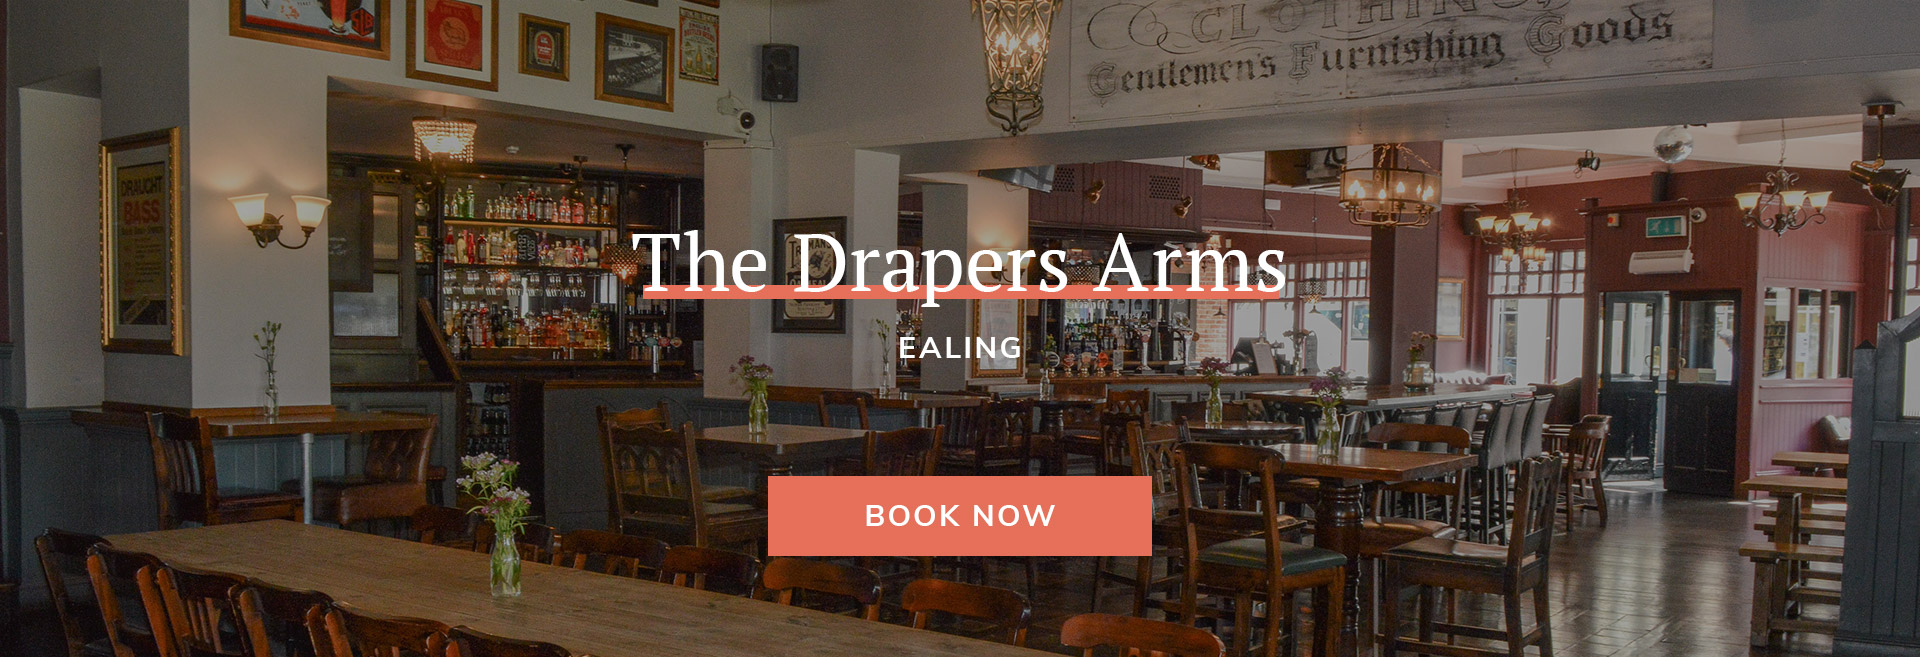 The Drapers Arms Banner 3